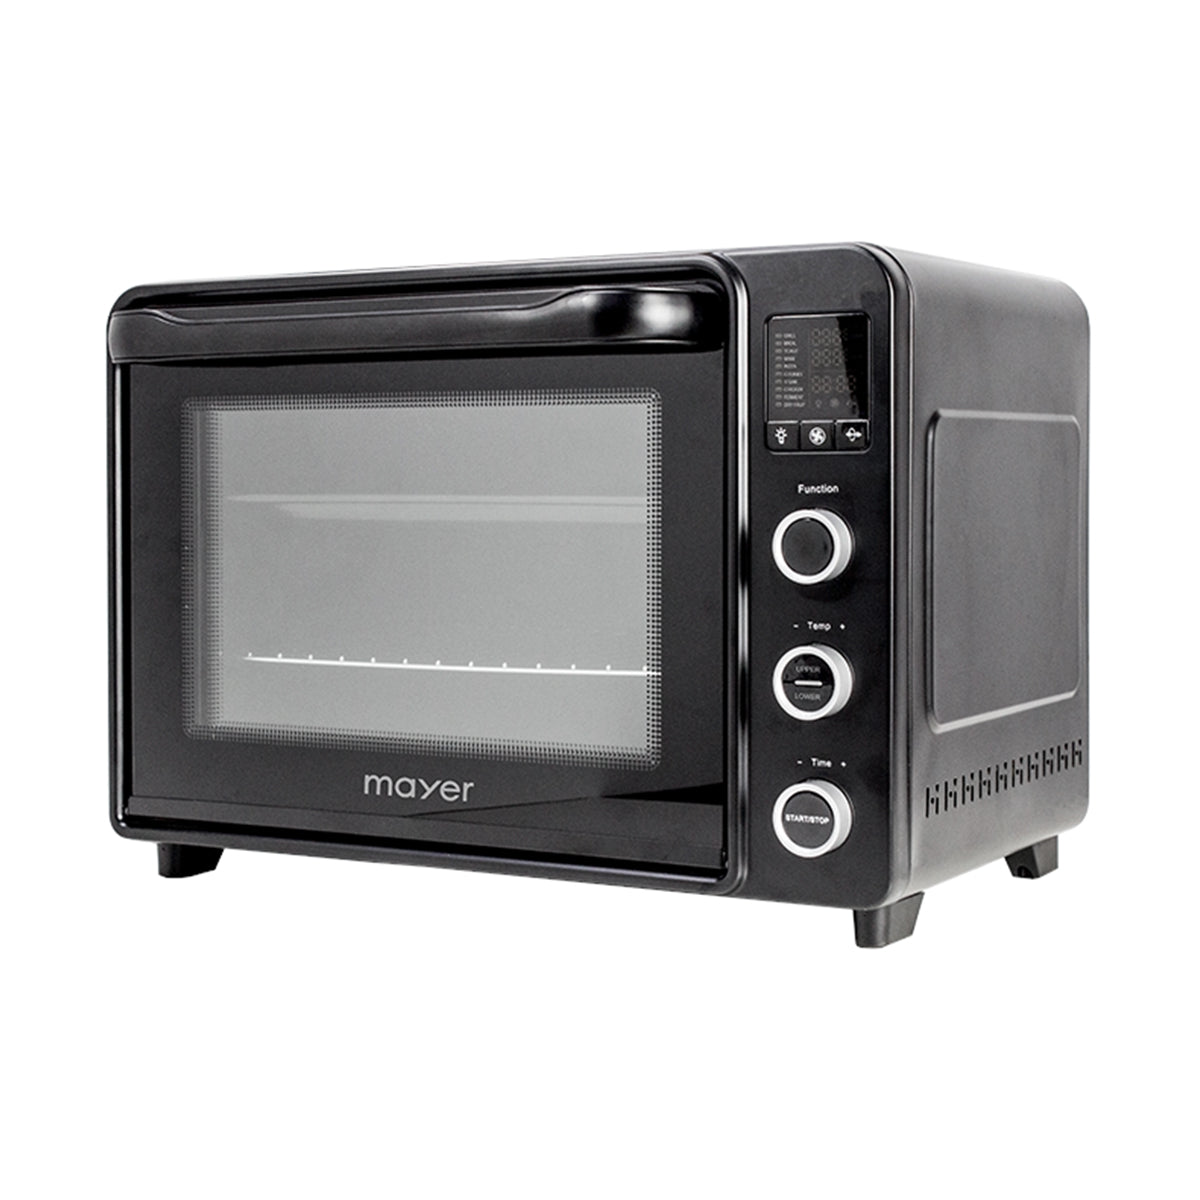 Mayer Electric Oven 38L